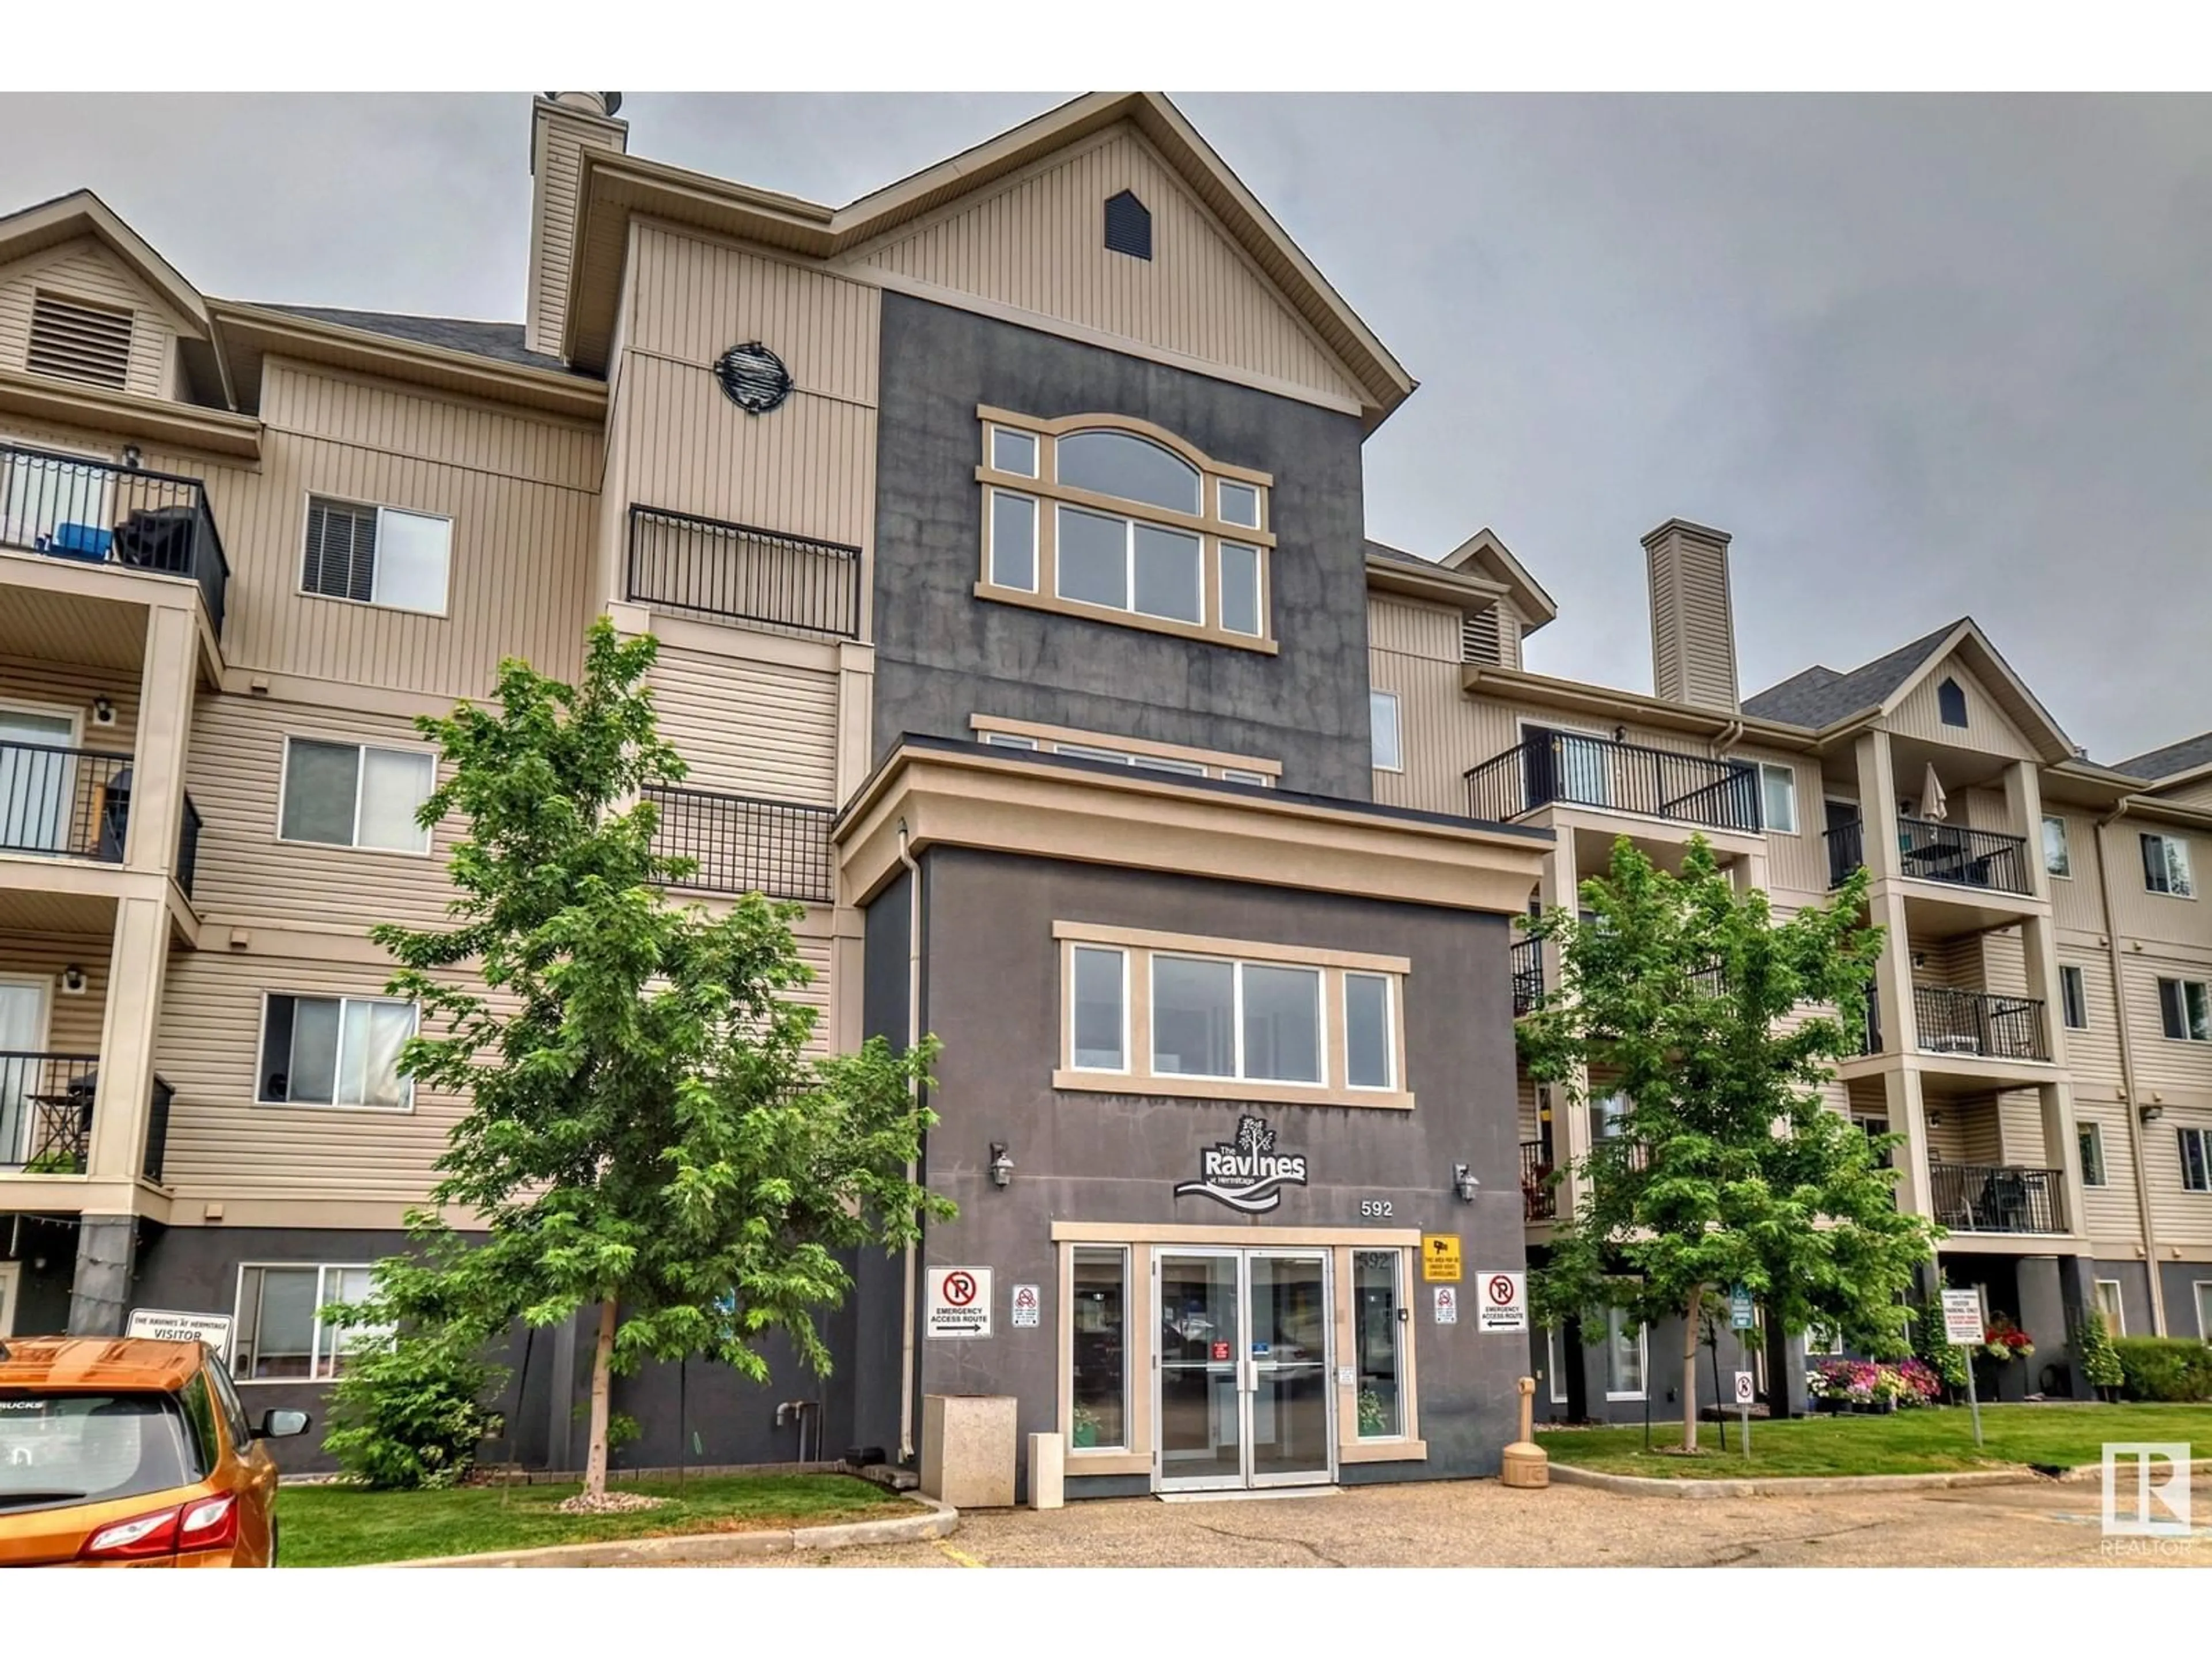 A pic from exterior of the house or condo for #406 592 HOOKE RD NW, Edmonton Alberta T5A5H2